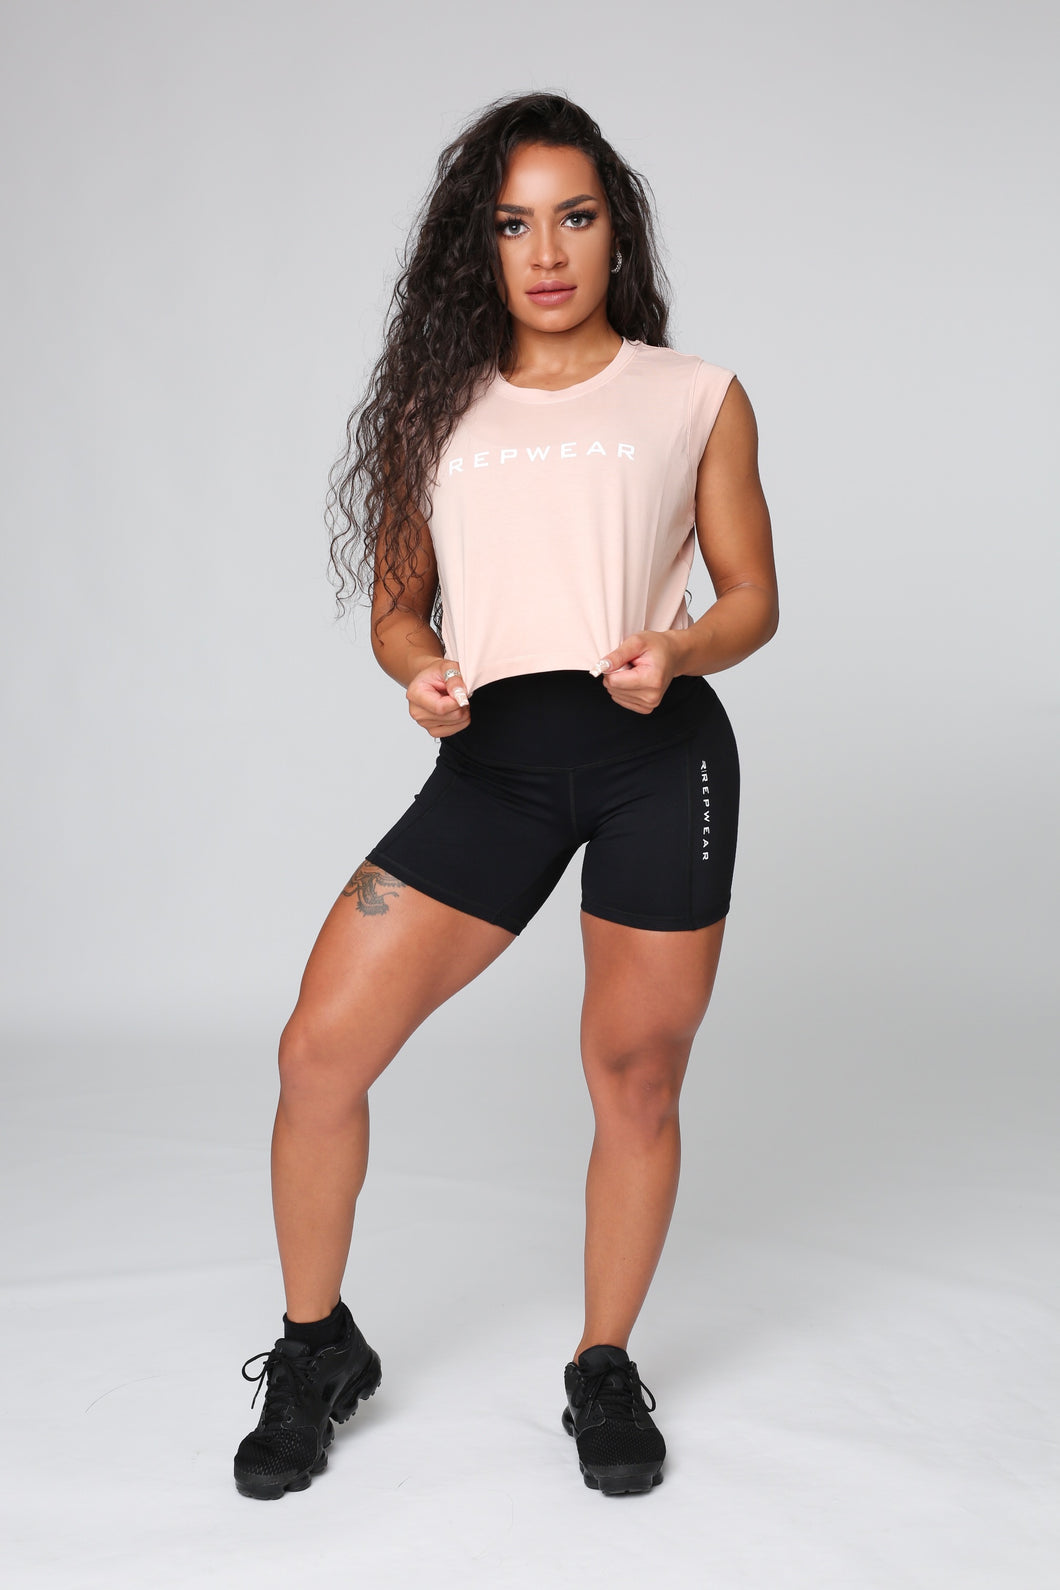 Repwear Fitness Cropped T-shirt Coral